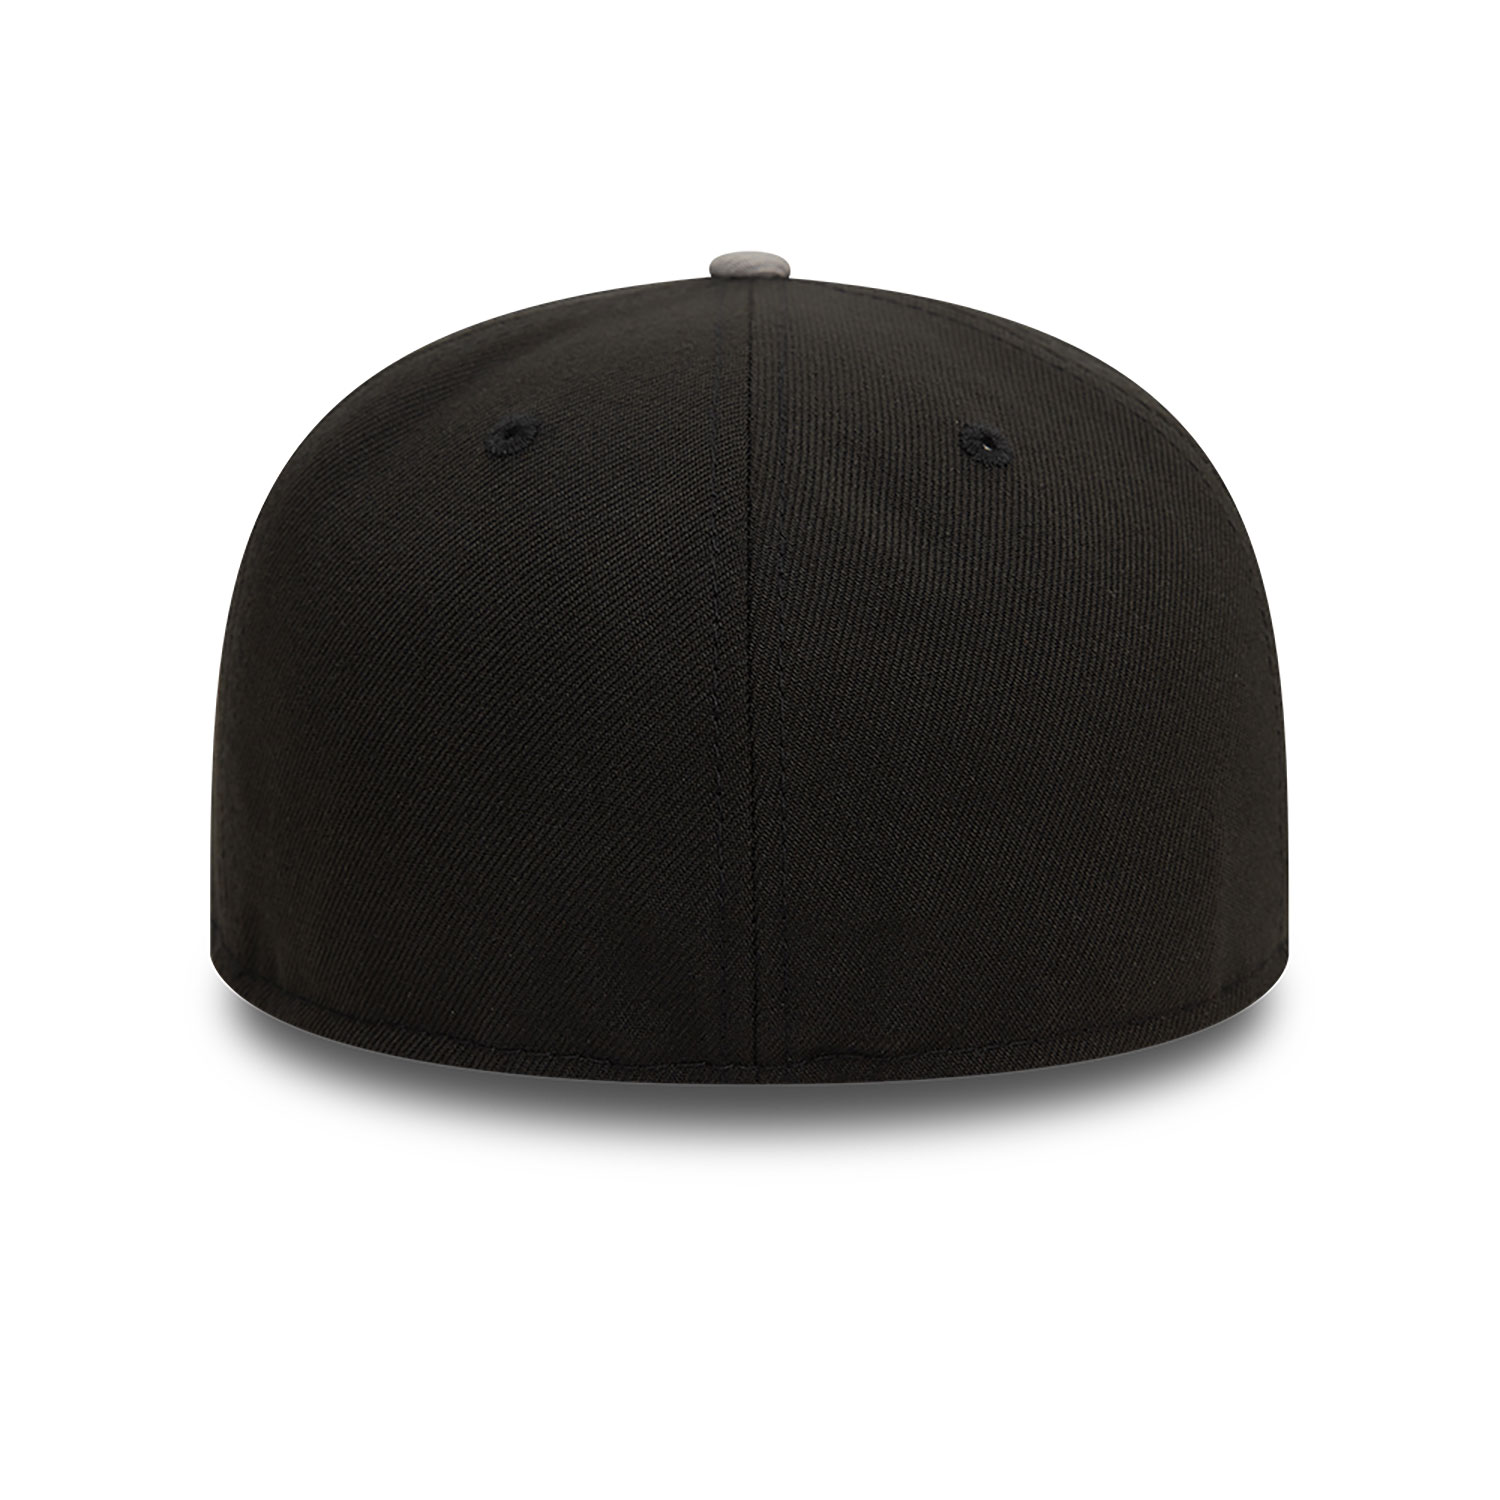 New Era Contrast Crown Black and Grey 59FIFTY Fitted Cap